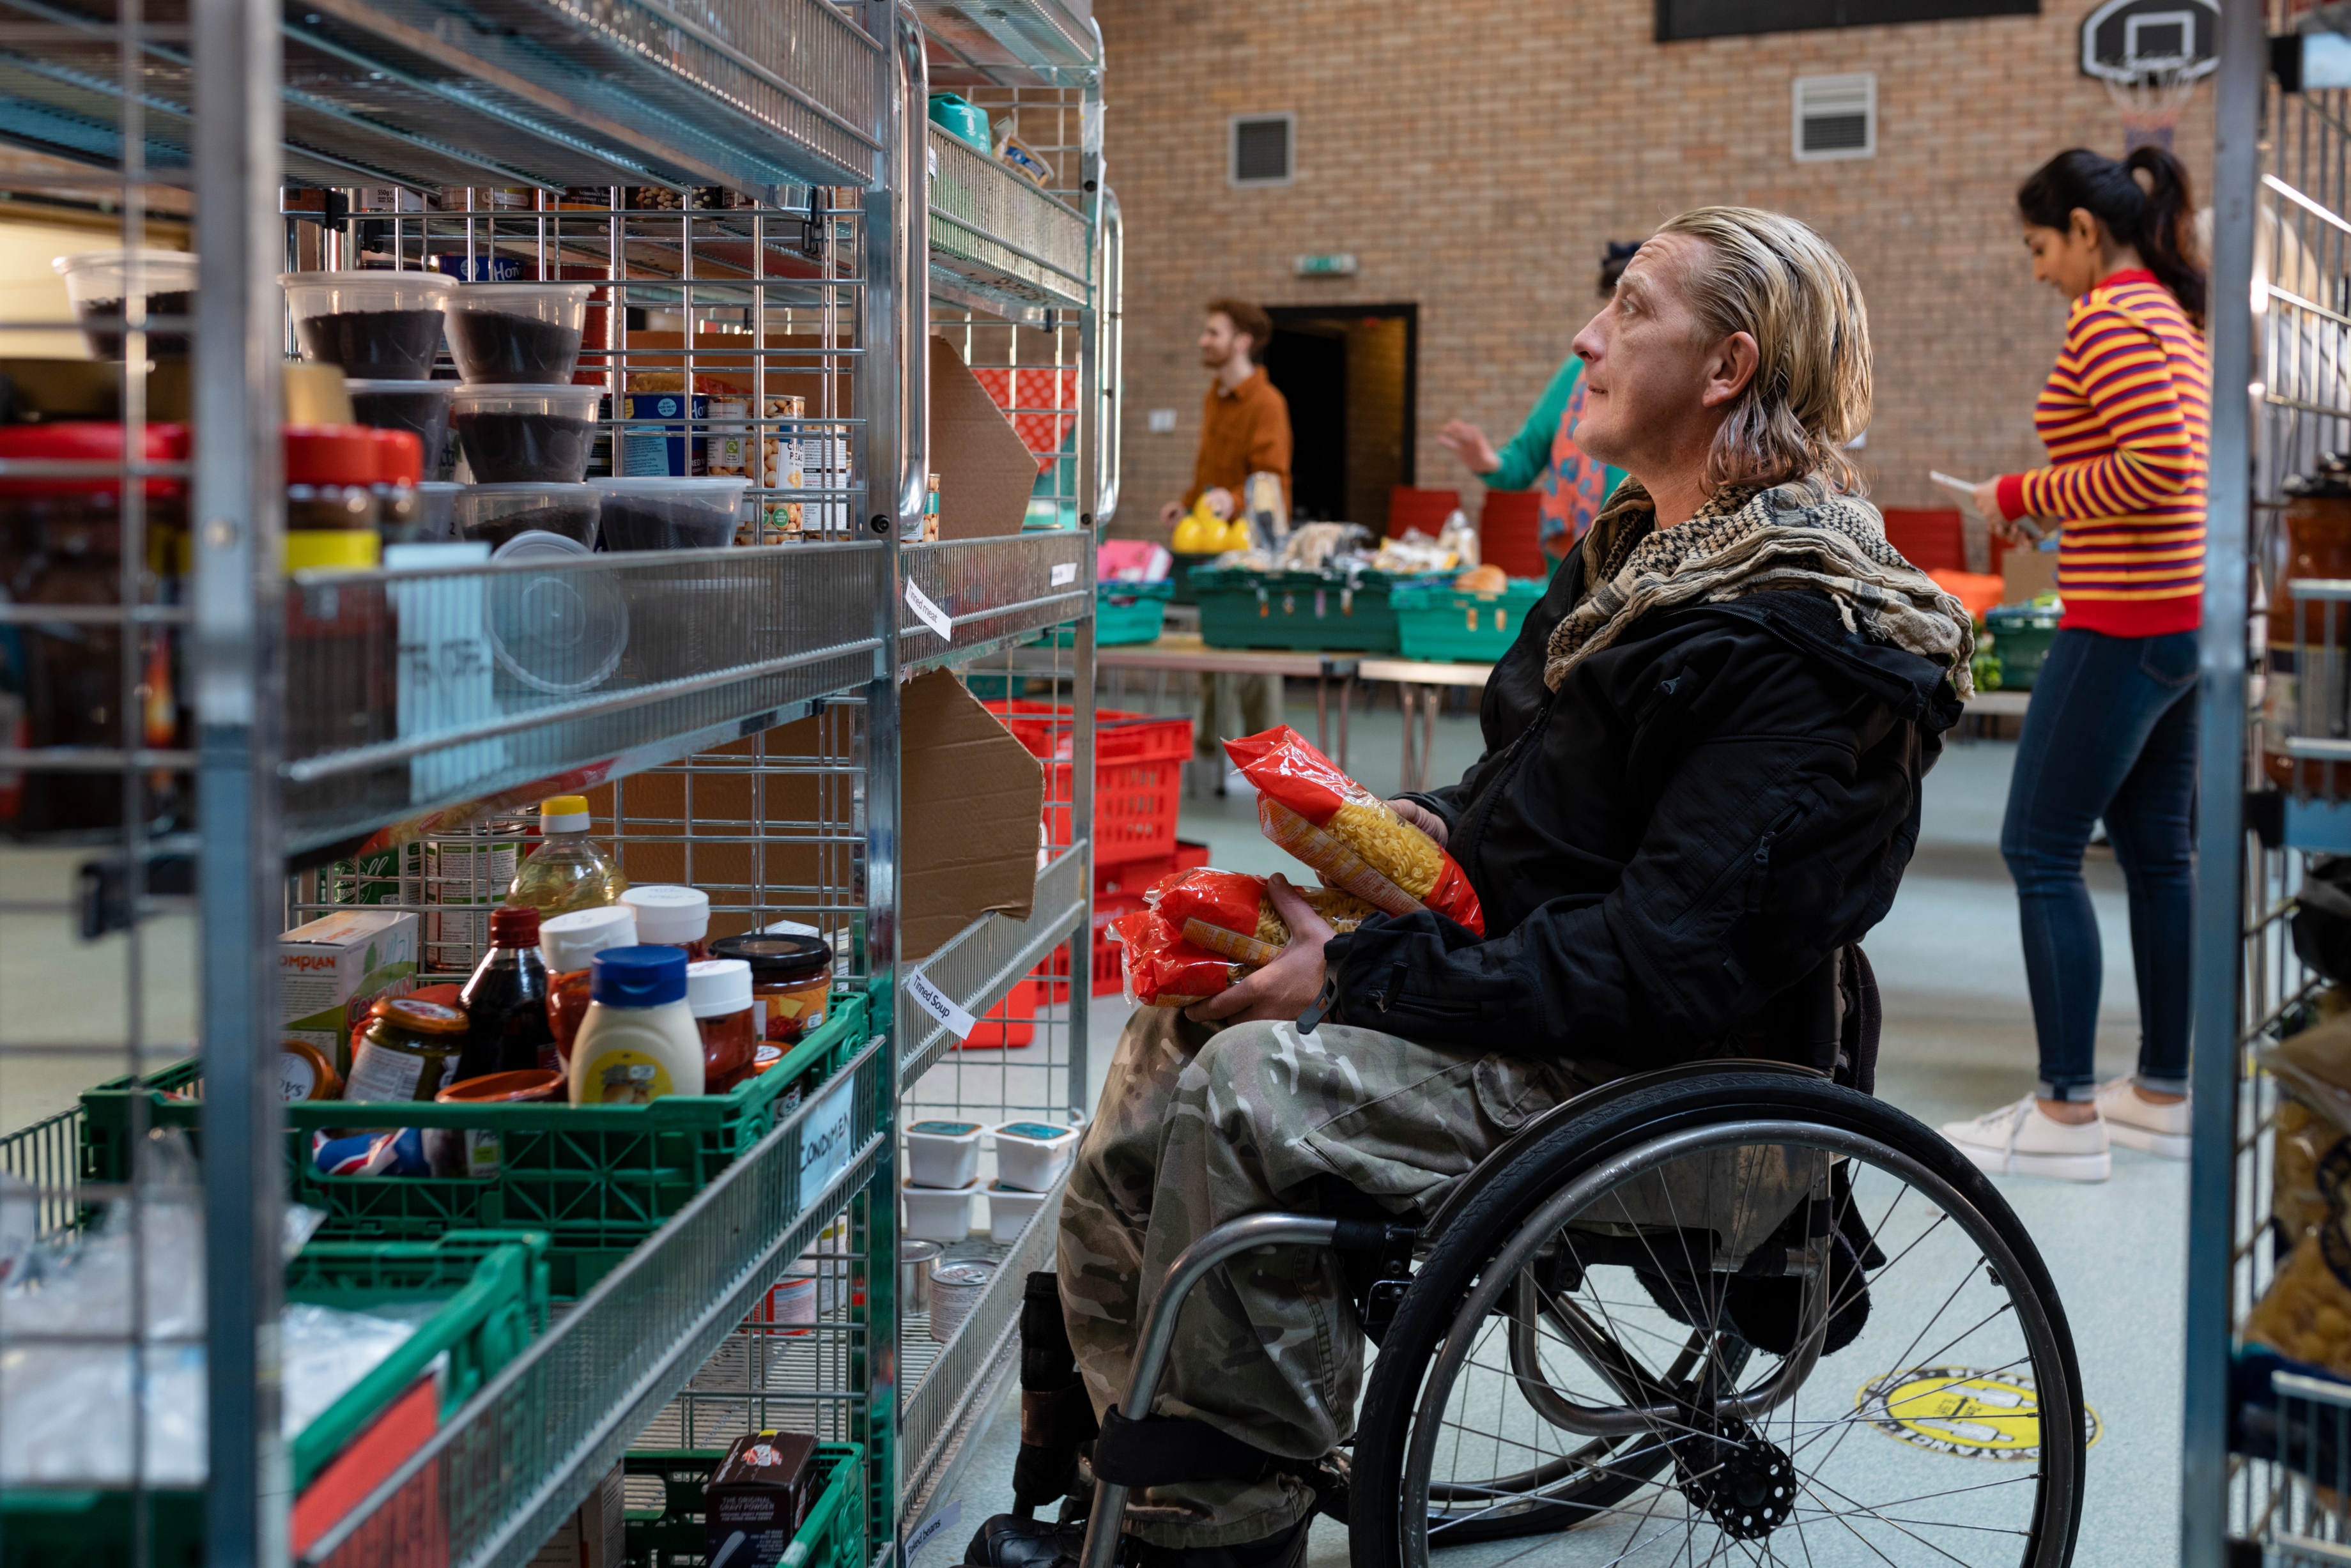 A man in a wheelchair looks up at assorted food items in wire baskets on shelves